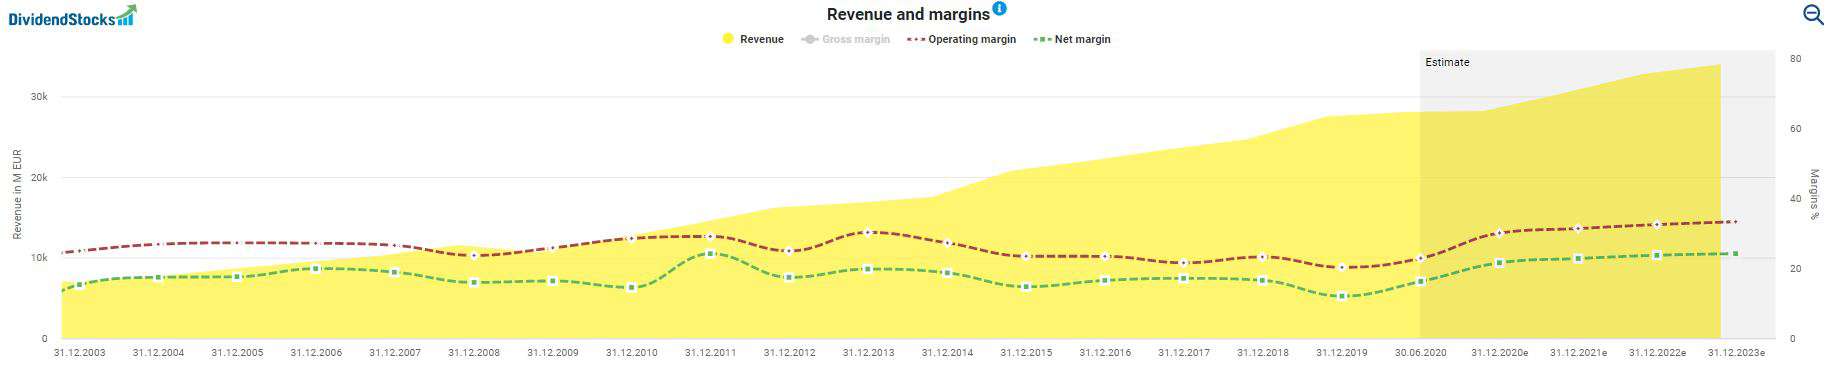 Development of revenue and margins of the SAP stock